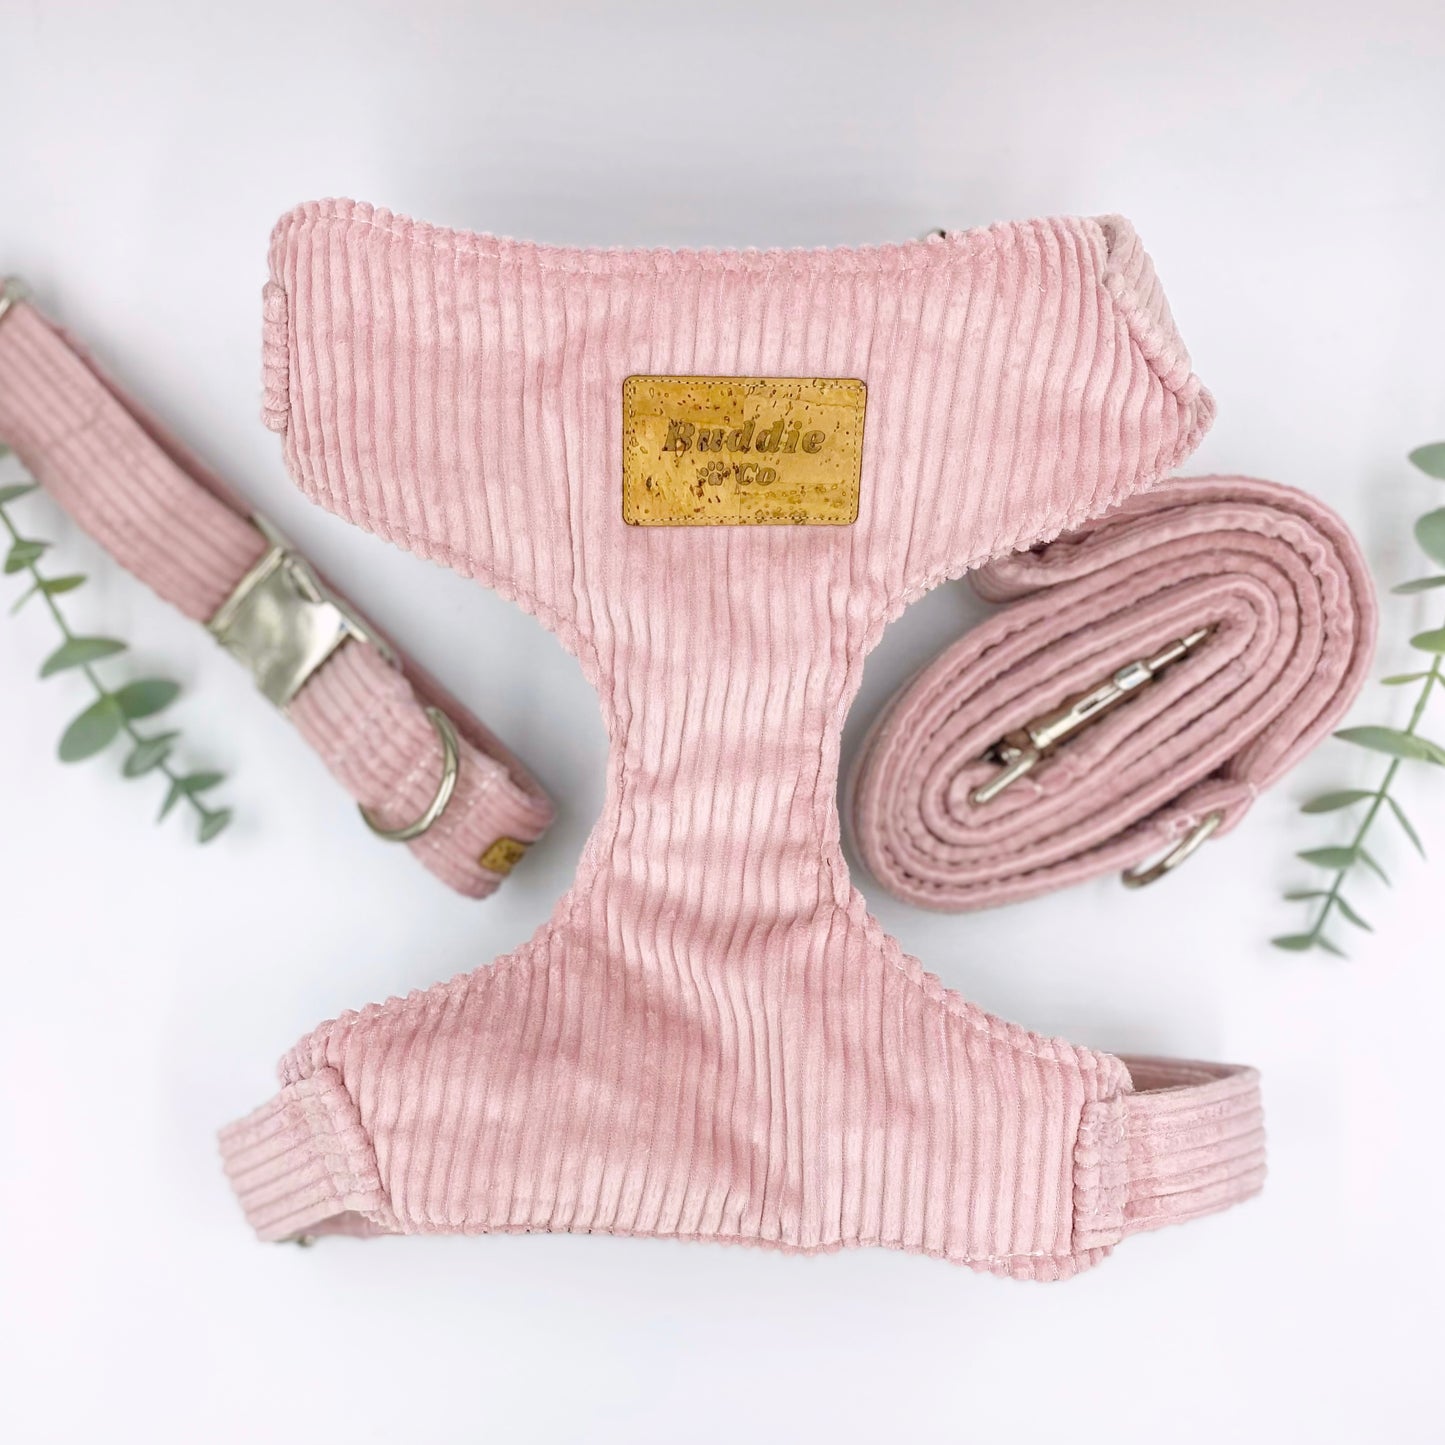 The 'Chelsea' Chest Harness Bundle